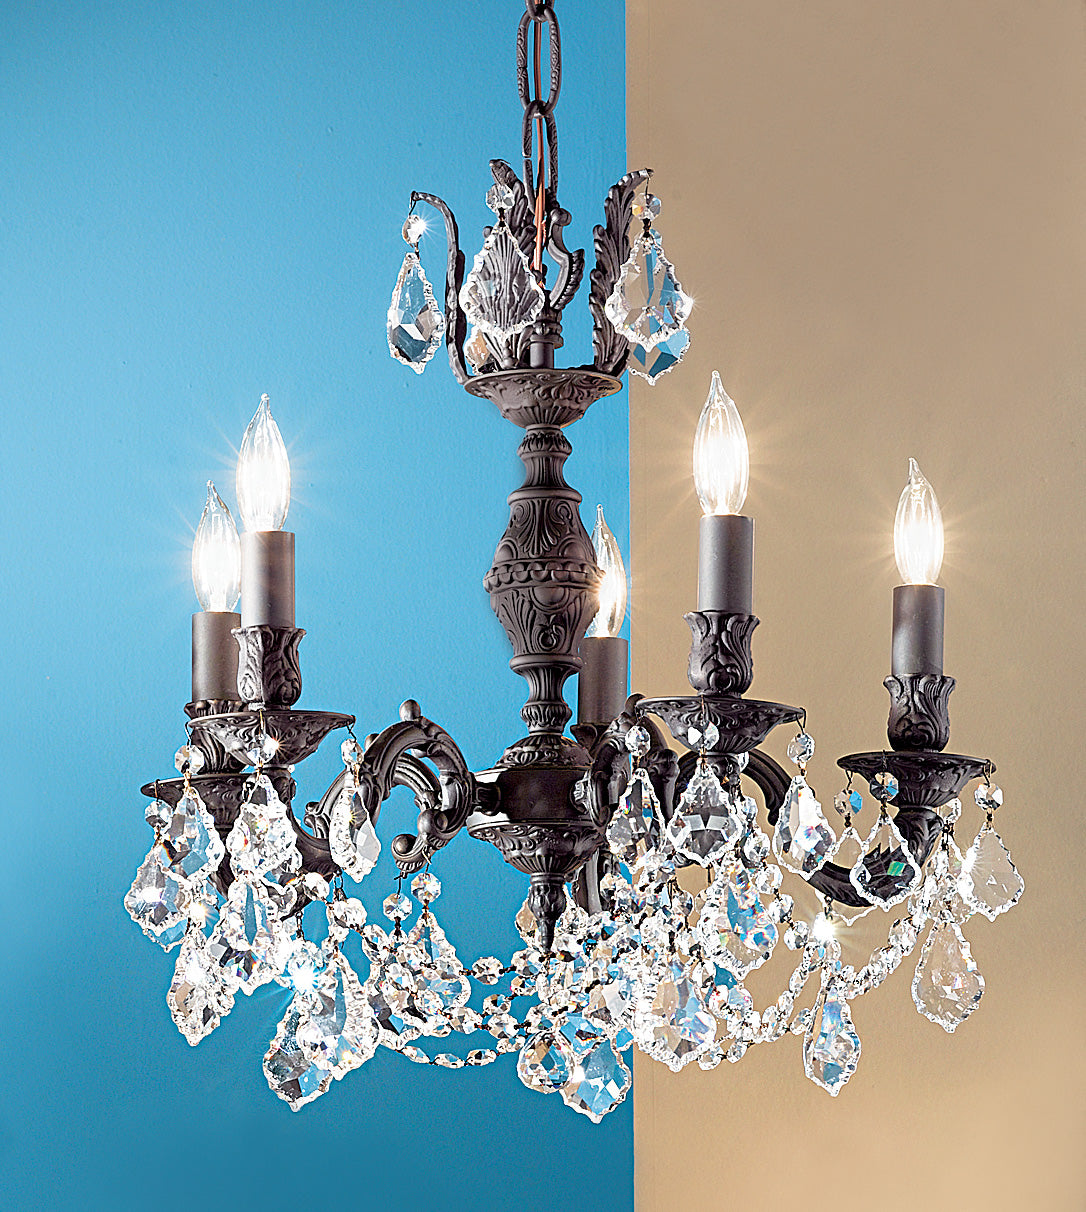 Classic Lighting 57385 AGP S Chateau Imperial Crystal Chandelier in Aged Pewter (Imported from Spain)